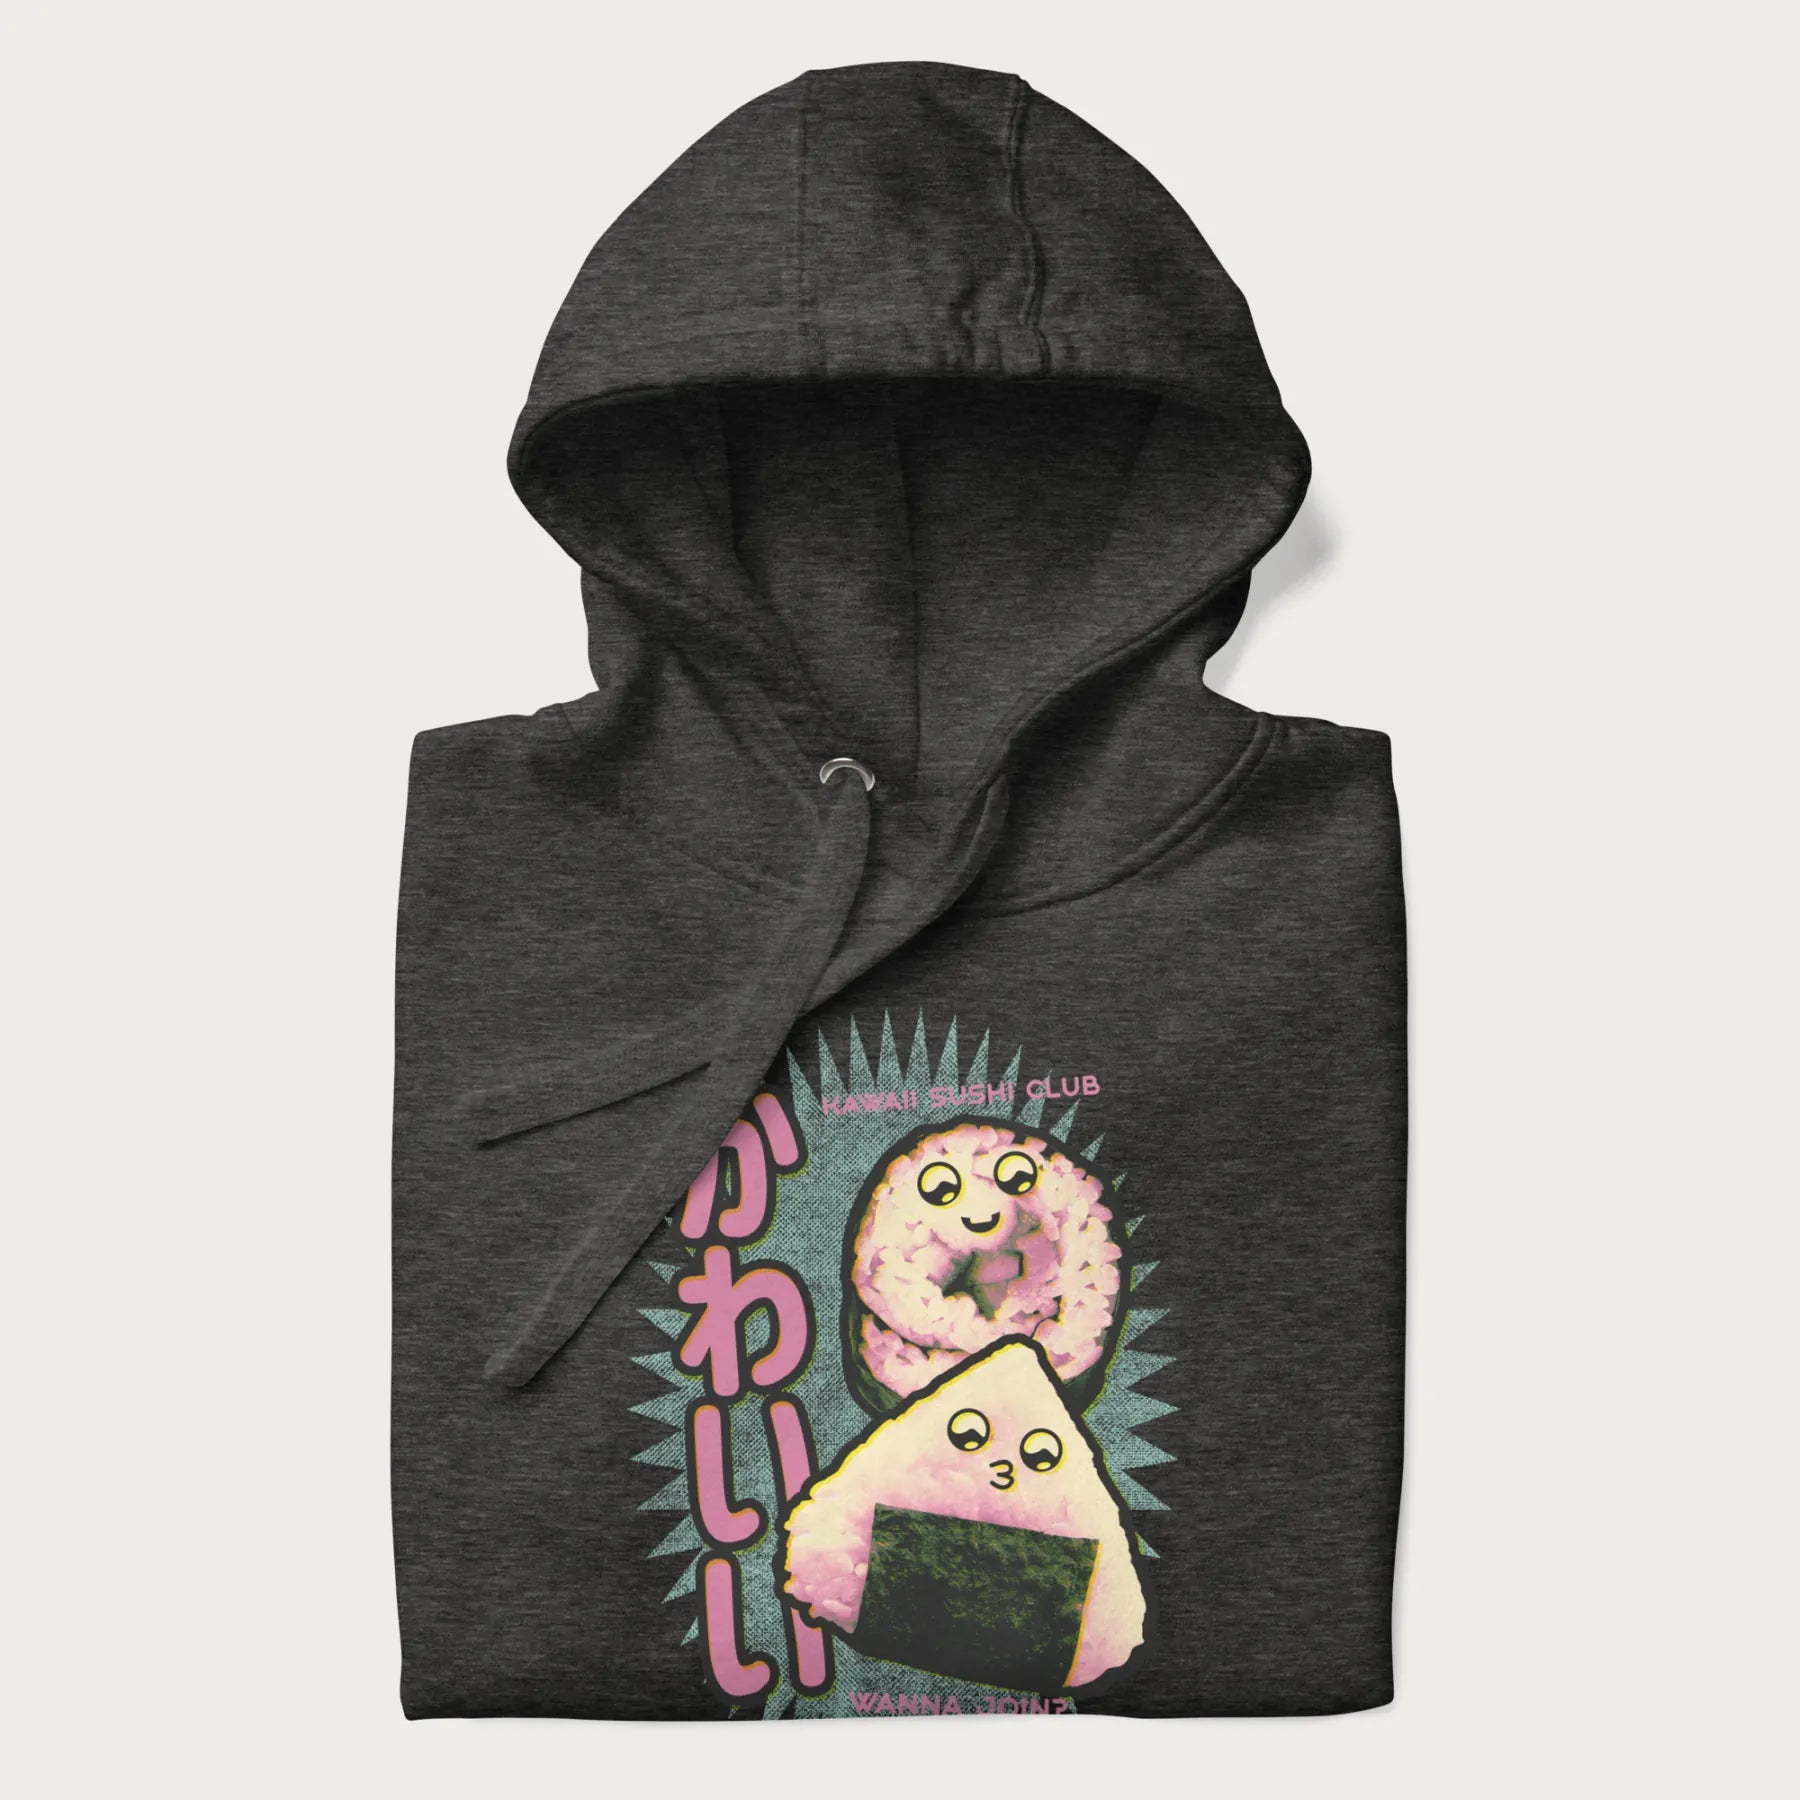 Folded dark grey hoodie featuring a cute sushi and onigiri graphic with the text "Kawaii Sushi Club", colorful neon accents and Japanese characters.